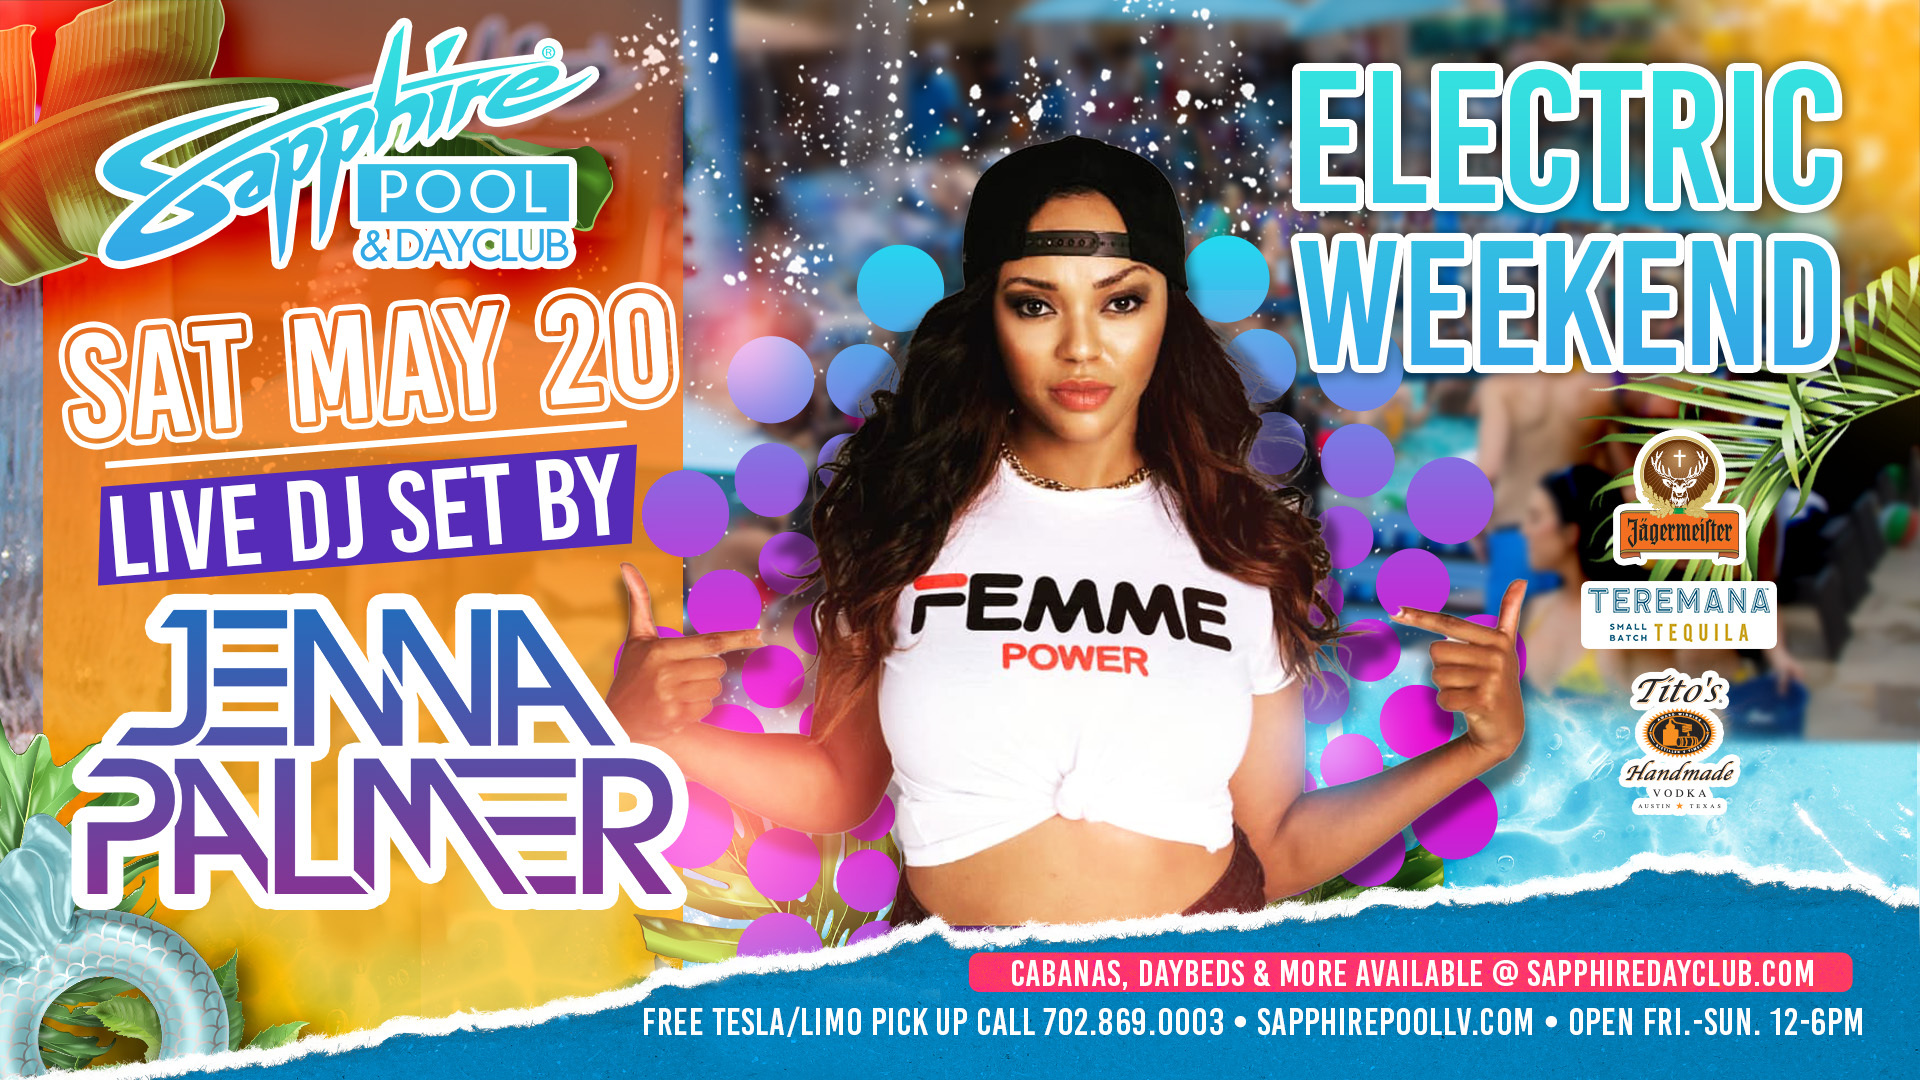 Local Legend DJ Jenna Palmer Takes the Table at Sapphire Pool Saturday May 20